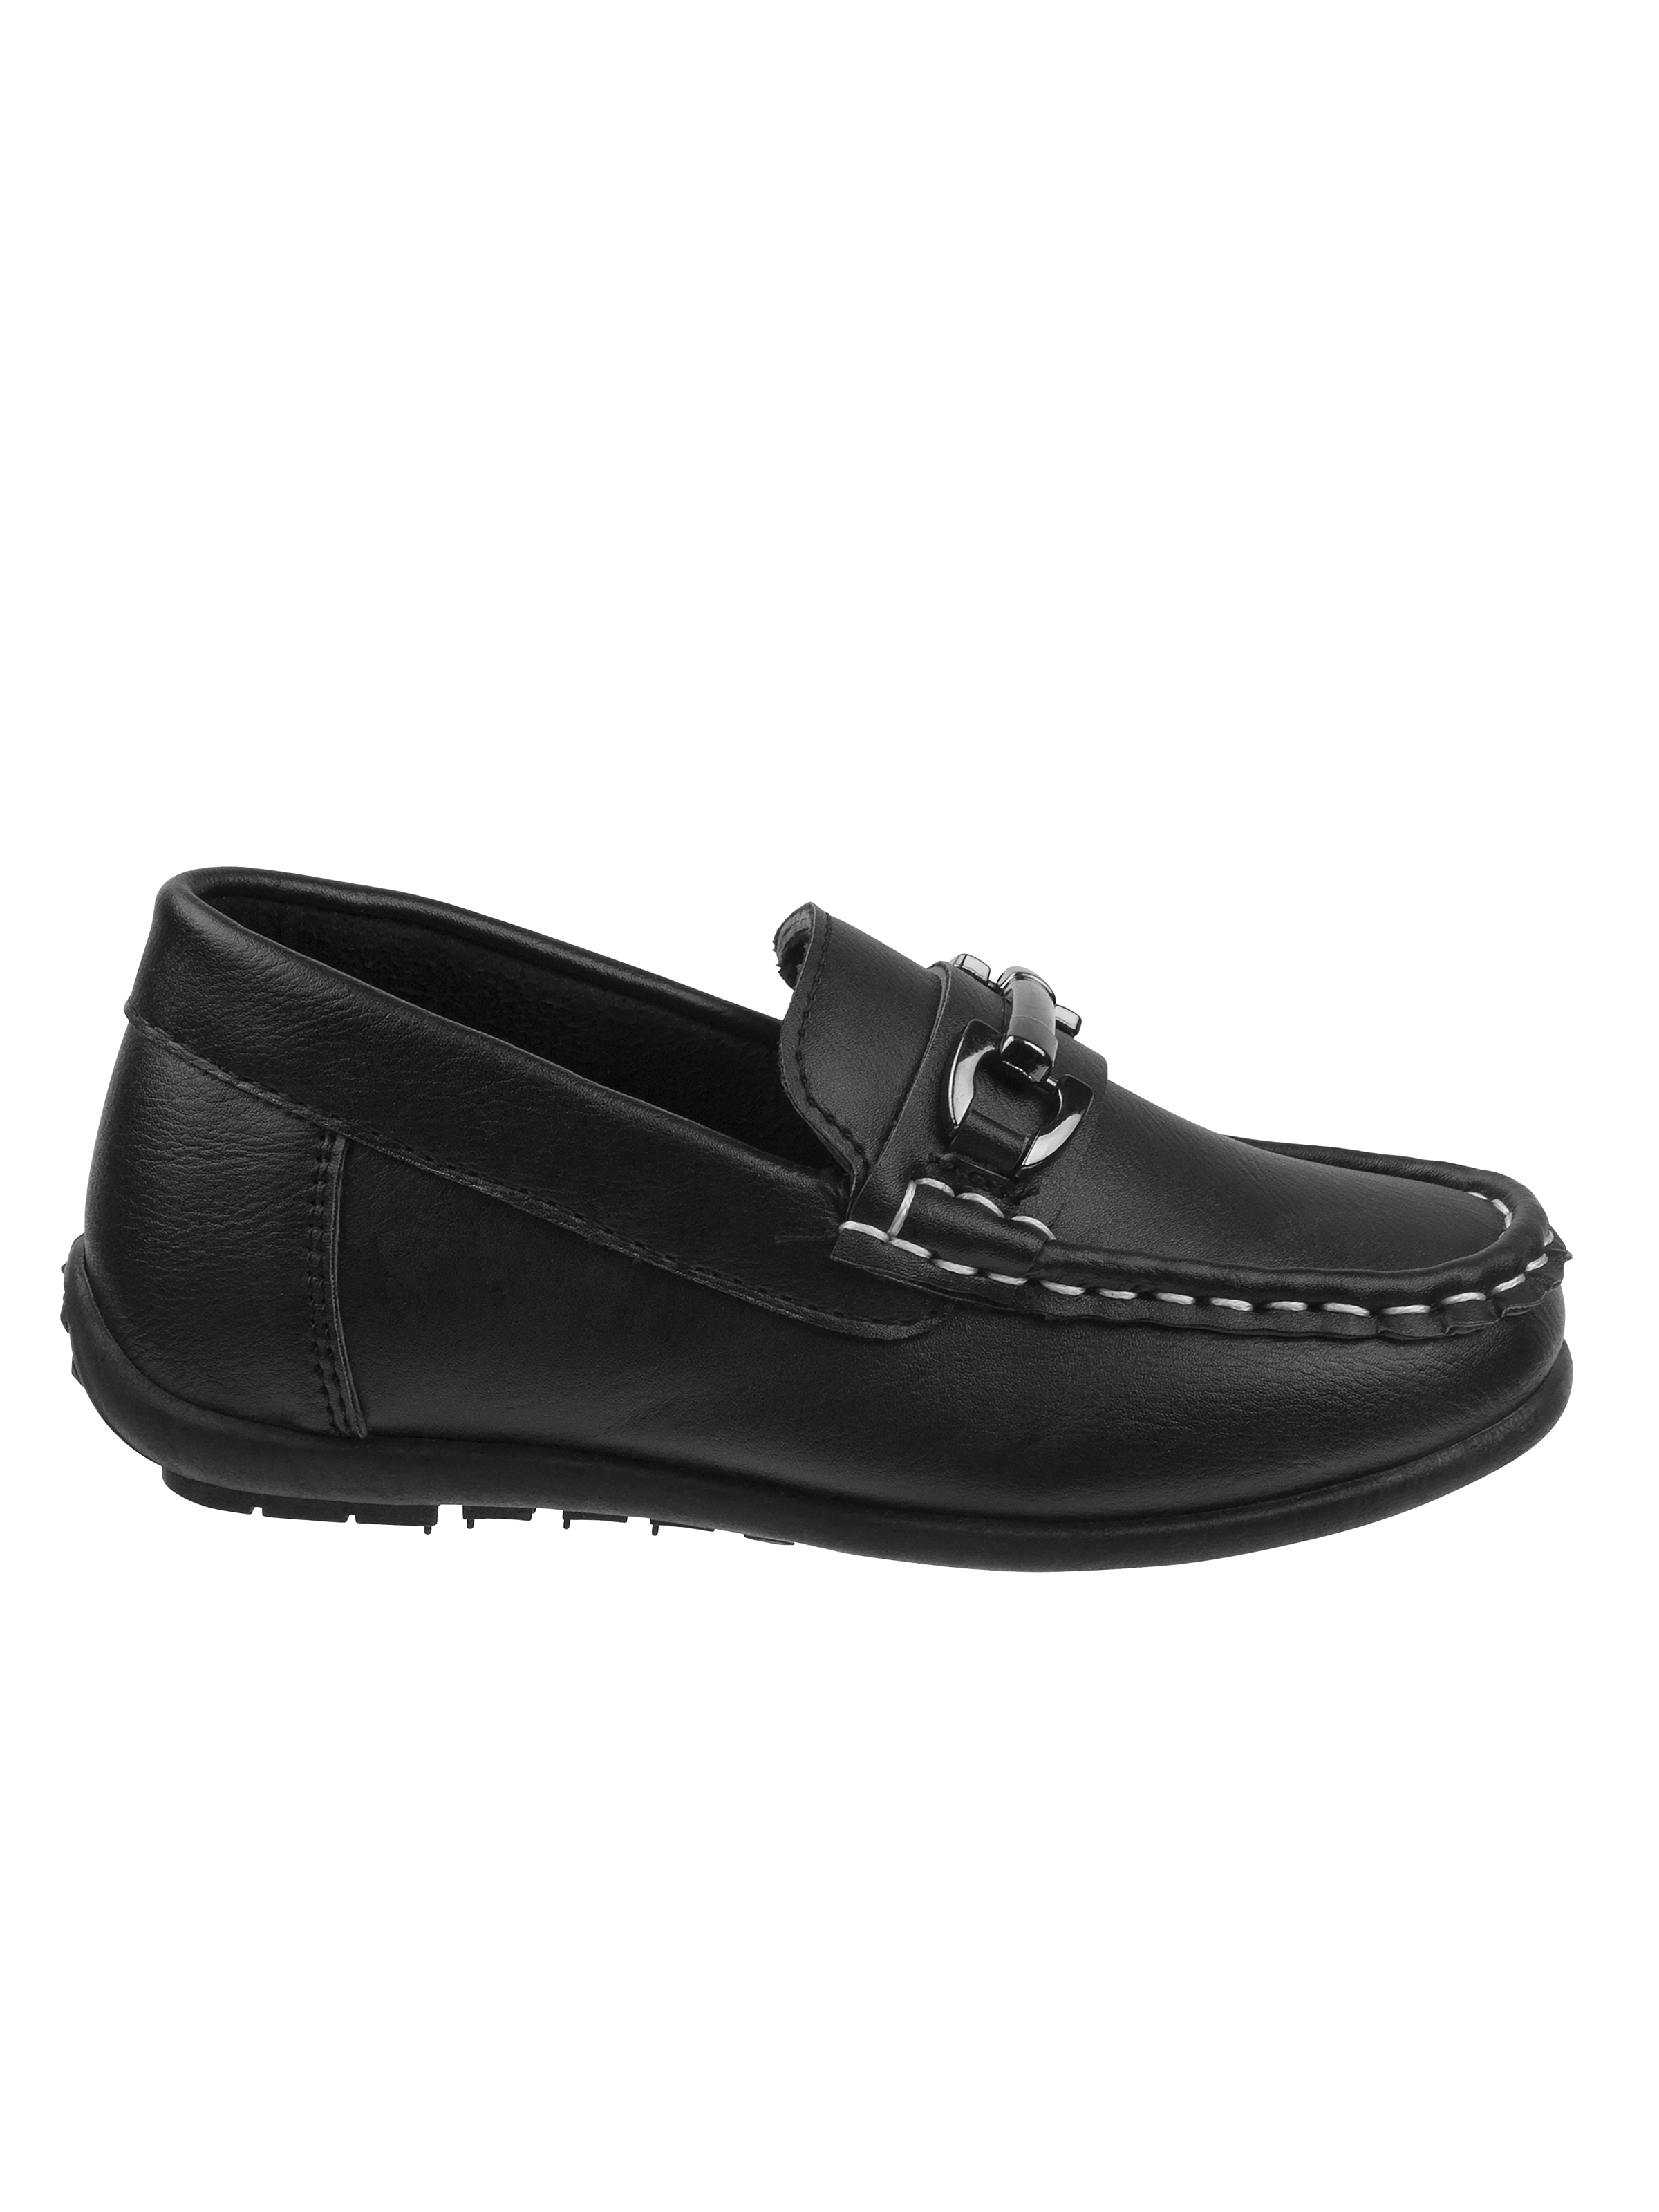 Josmo Boys Slip On Casual Shoes. (Toddler/Little Kids) - image 2 of 5